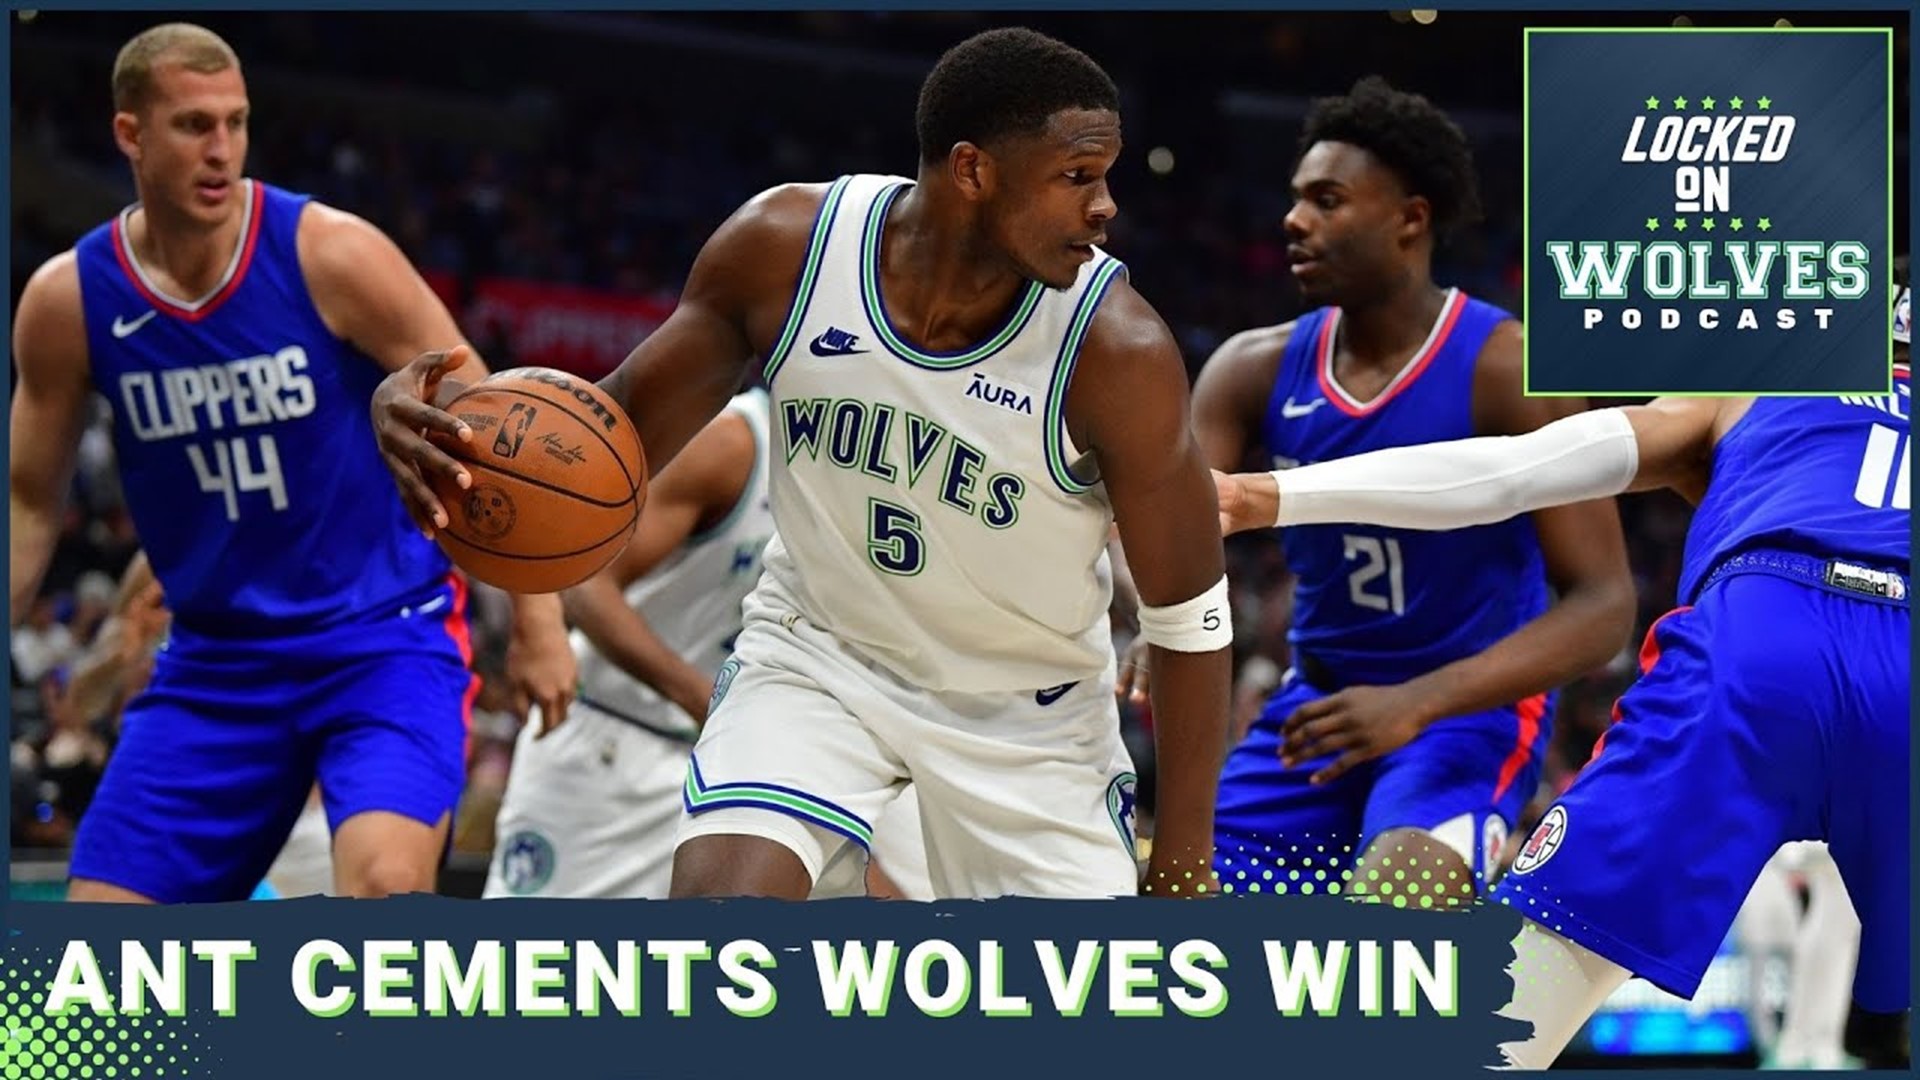 Anthony Edwards scores 37 and role players come through in Timberwolves' comeback over Clippers